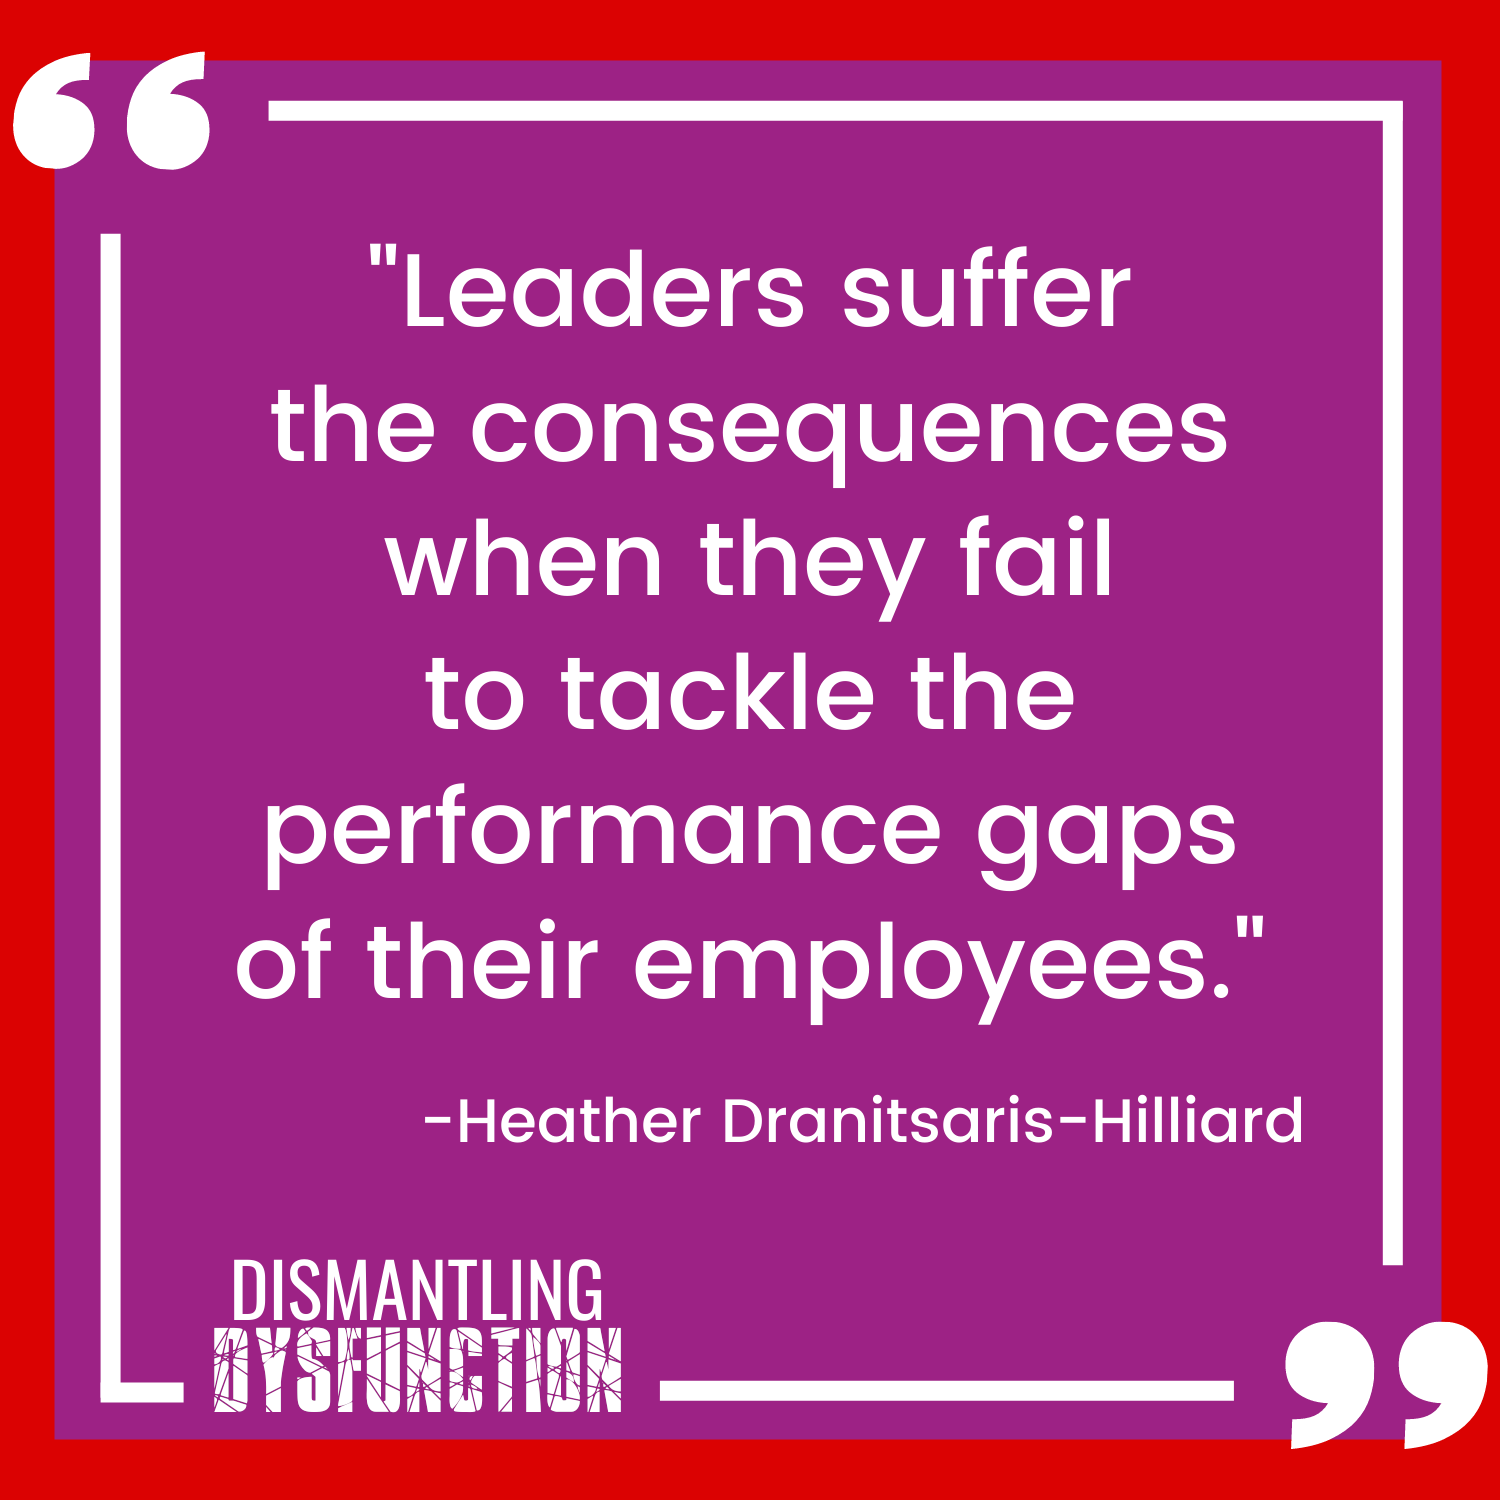 "Leaders suffer the consequences when they fail to tackle the performance gaps of their employees."